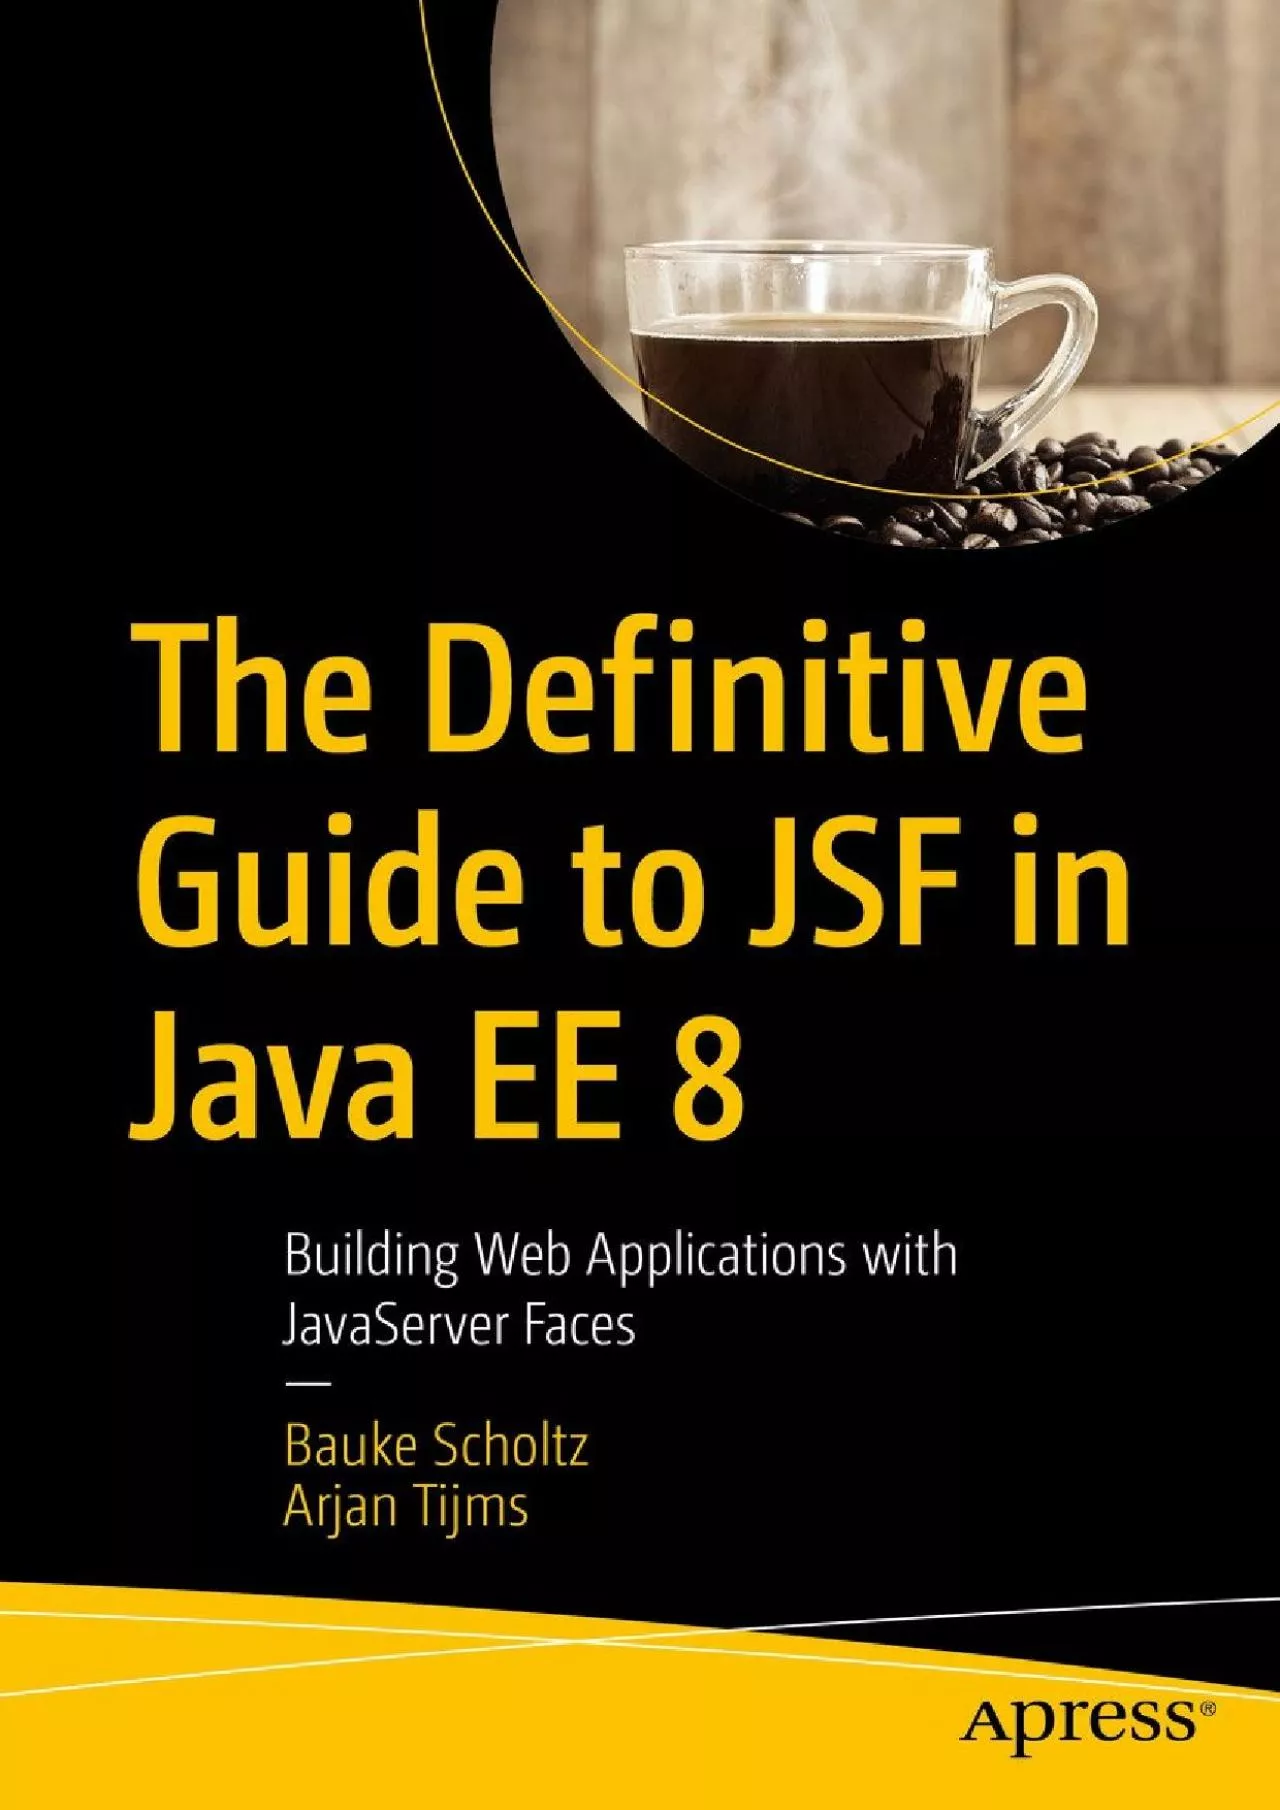 [eBOOK]-The Definitive Guide to JSF in Java EE 8: Building Web Applications with JavaServer